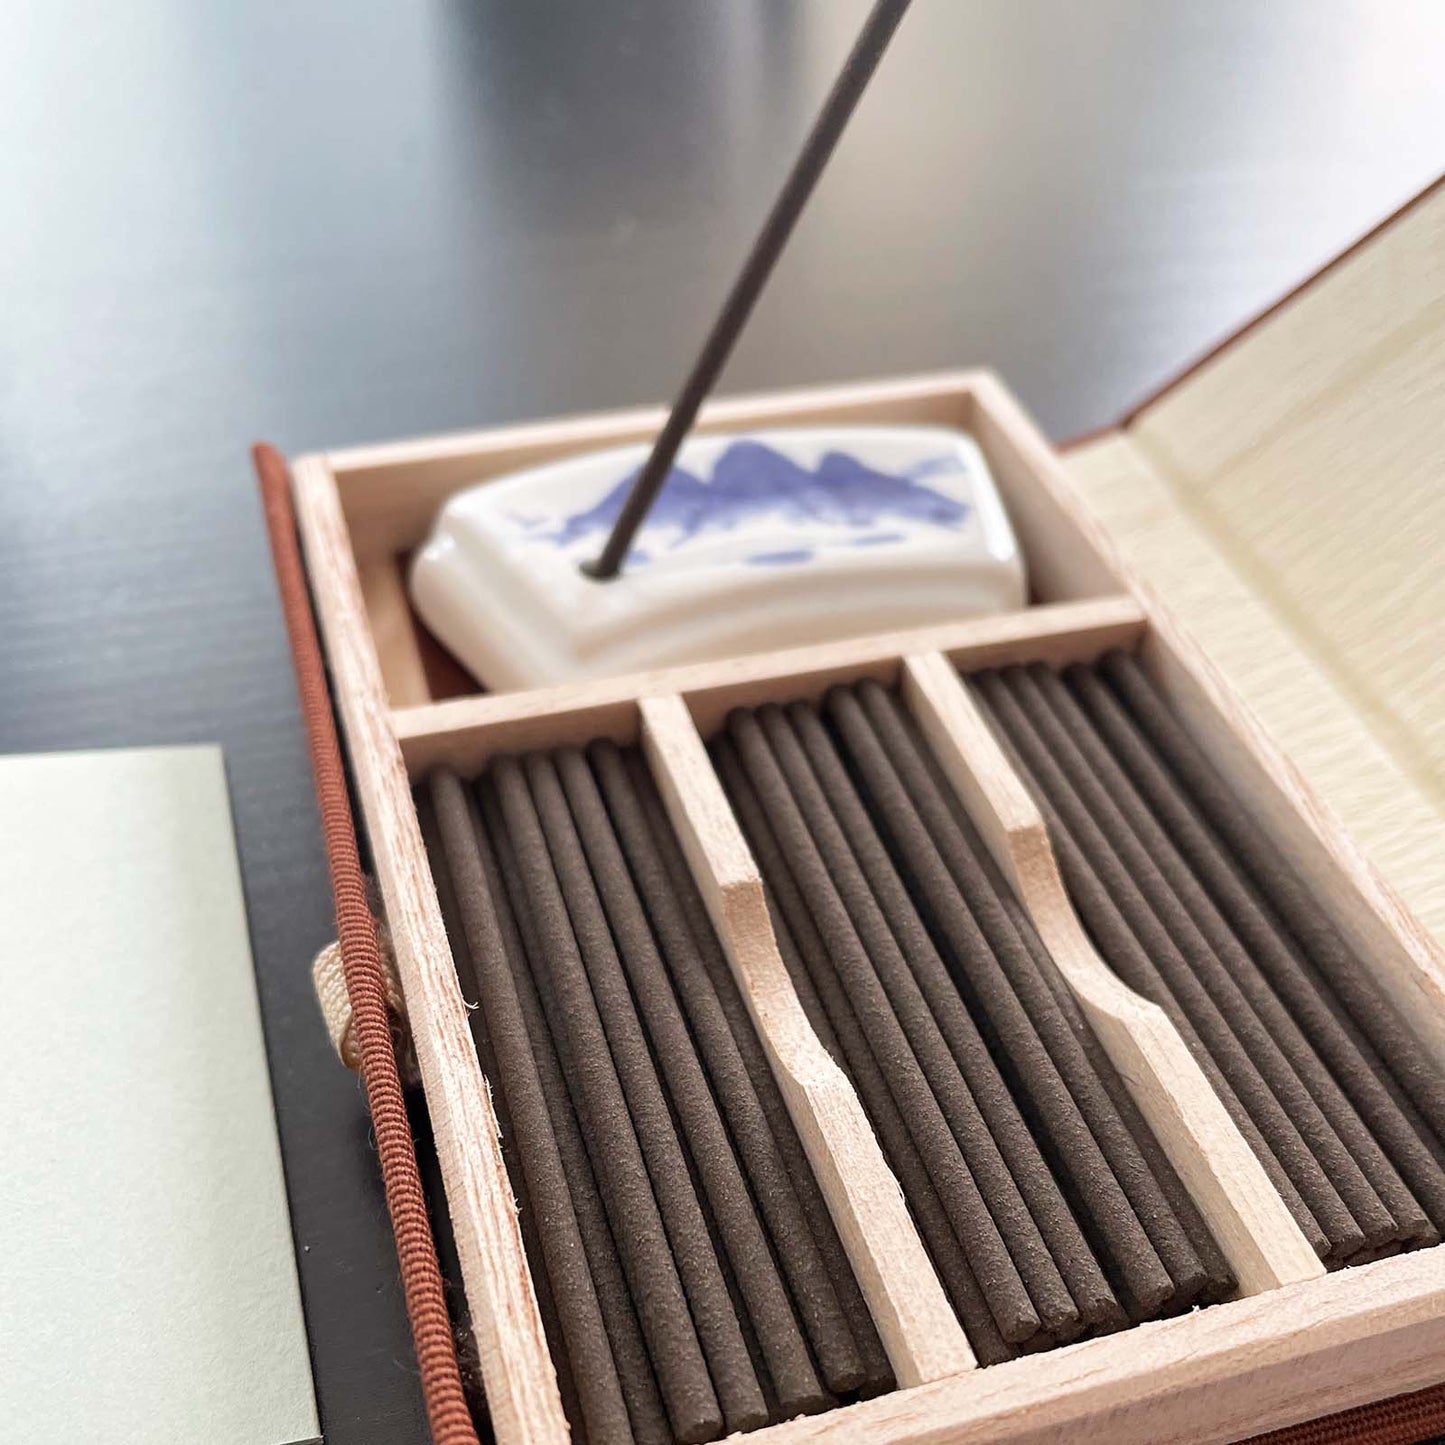 Jinkoh Juzan Incense_Lifestyle_Incense_Japanese Style_Traditional_1_2